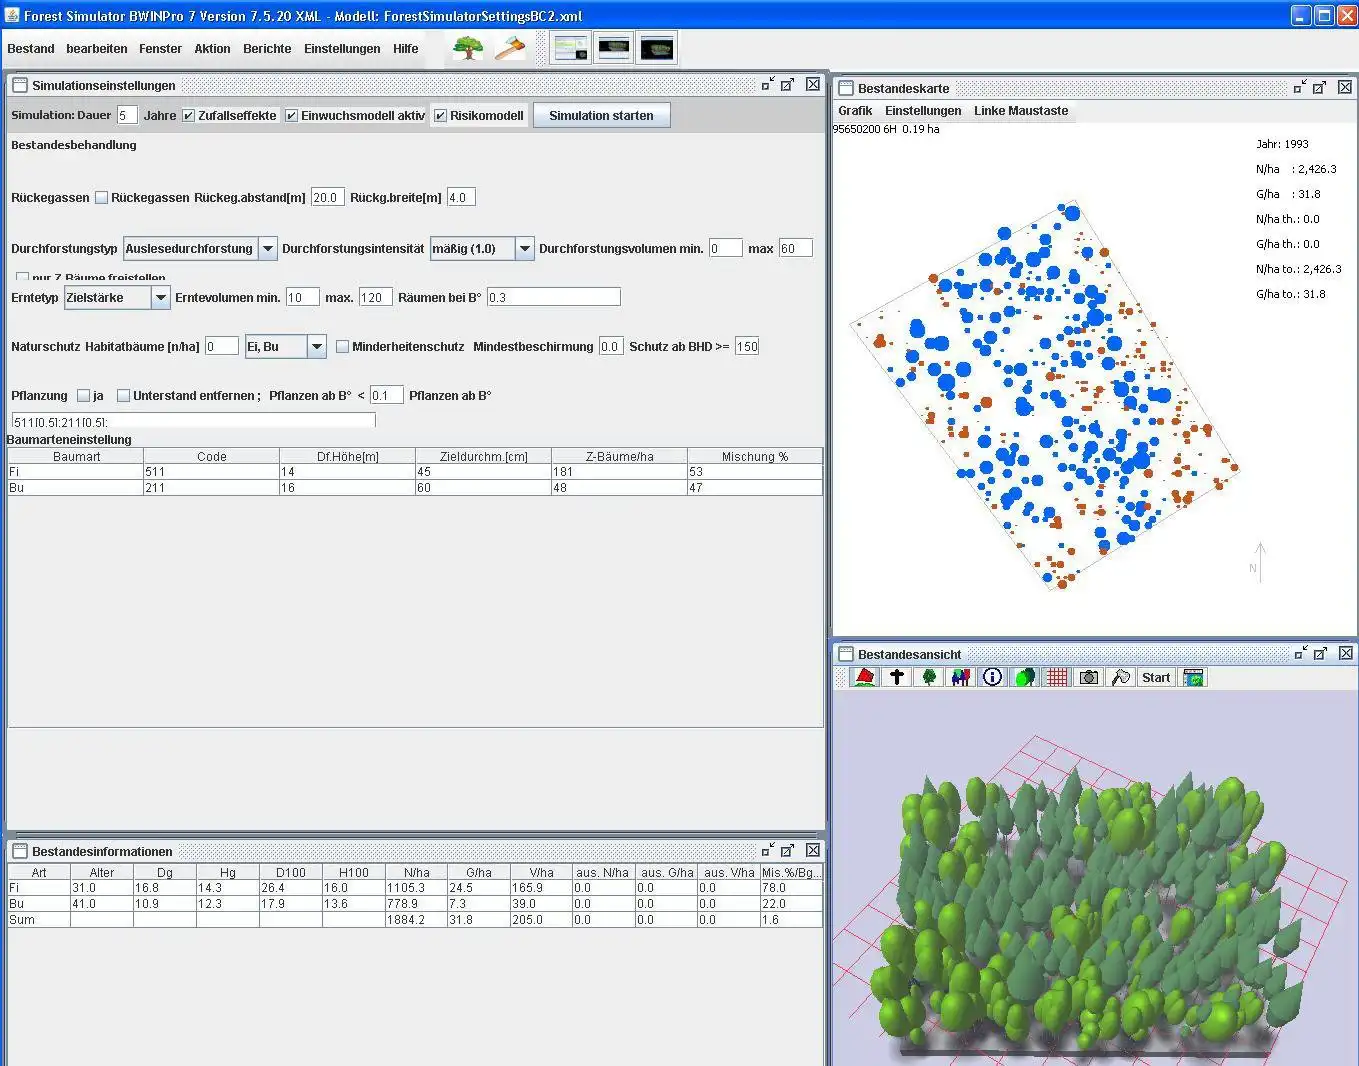 Scarica lo strumento Web o l'app Web TreeGrOSS Forest Growth Simulation per l'esecuzione in Linux online